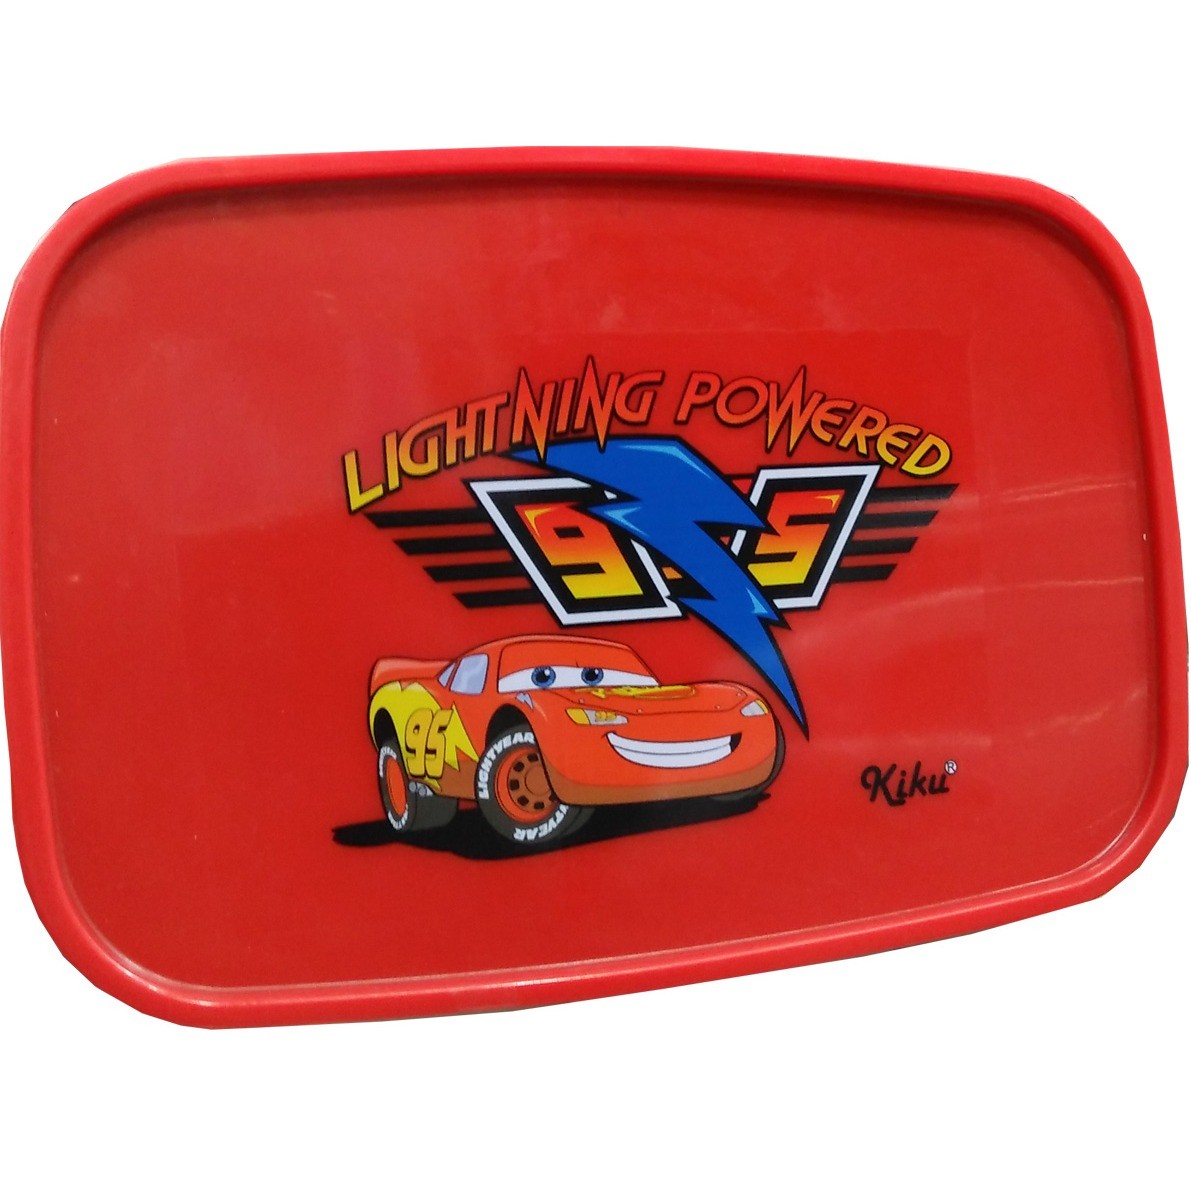 Car Racer Themed lunch box - Blue & Red